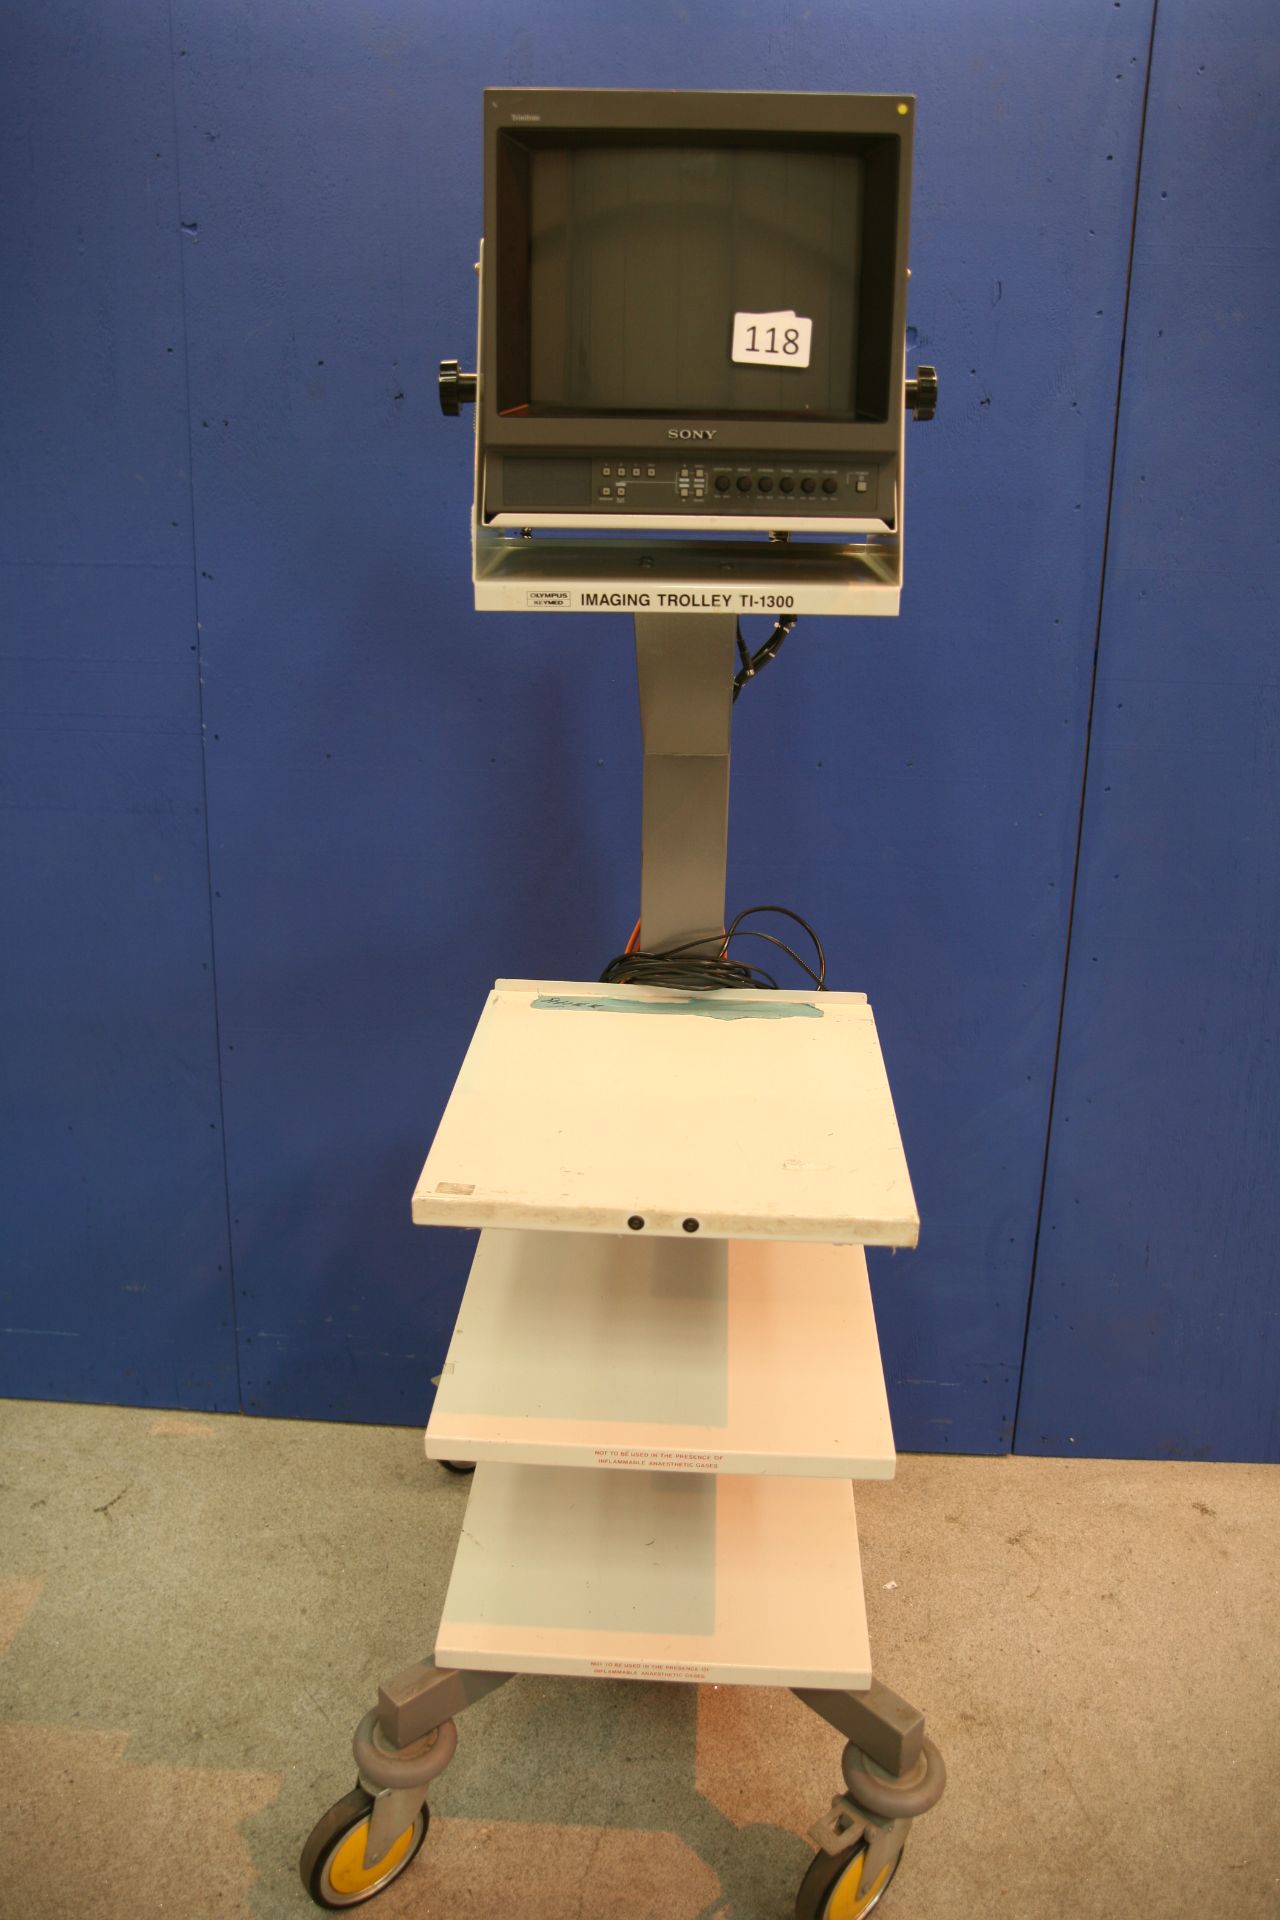 OlmpusKeymed Imaging Trolley TI-1300 Stack Tolley With Sony Trintiron Monitron